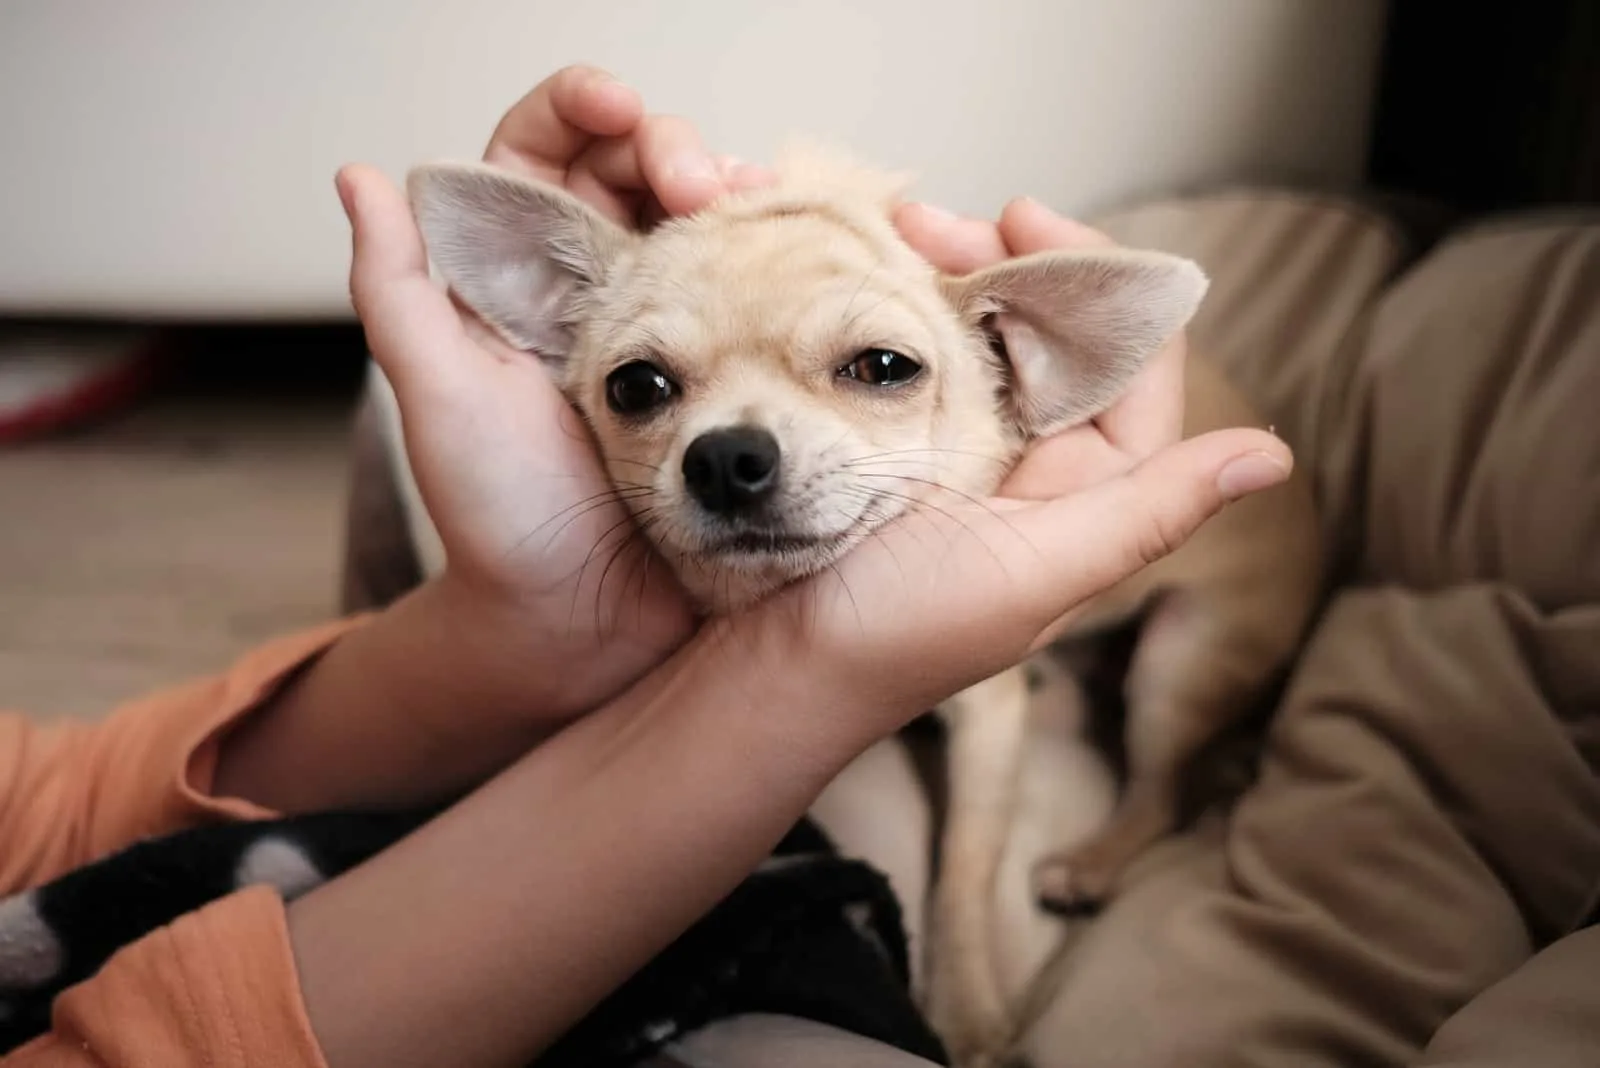 owner holding Chihuahua